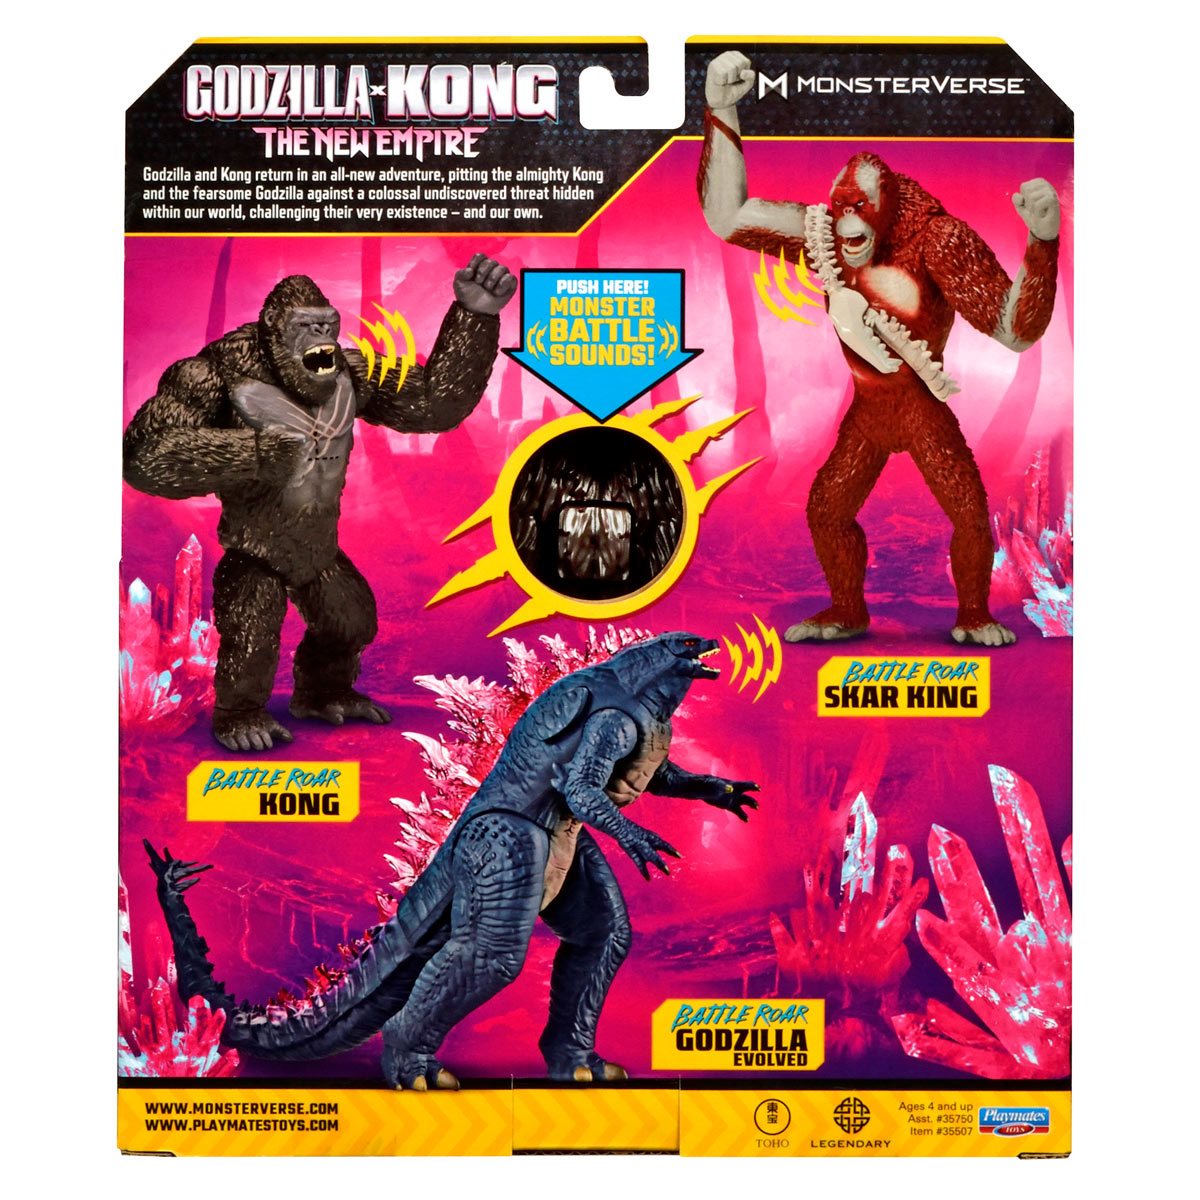 9 Godzilla Action Figures Worth Roaring About